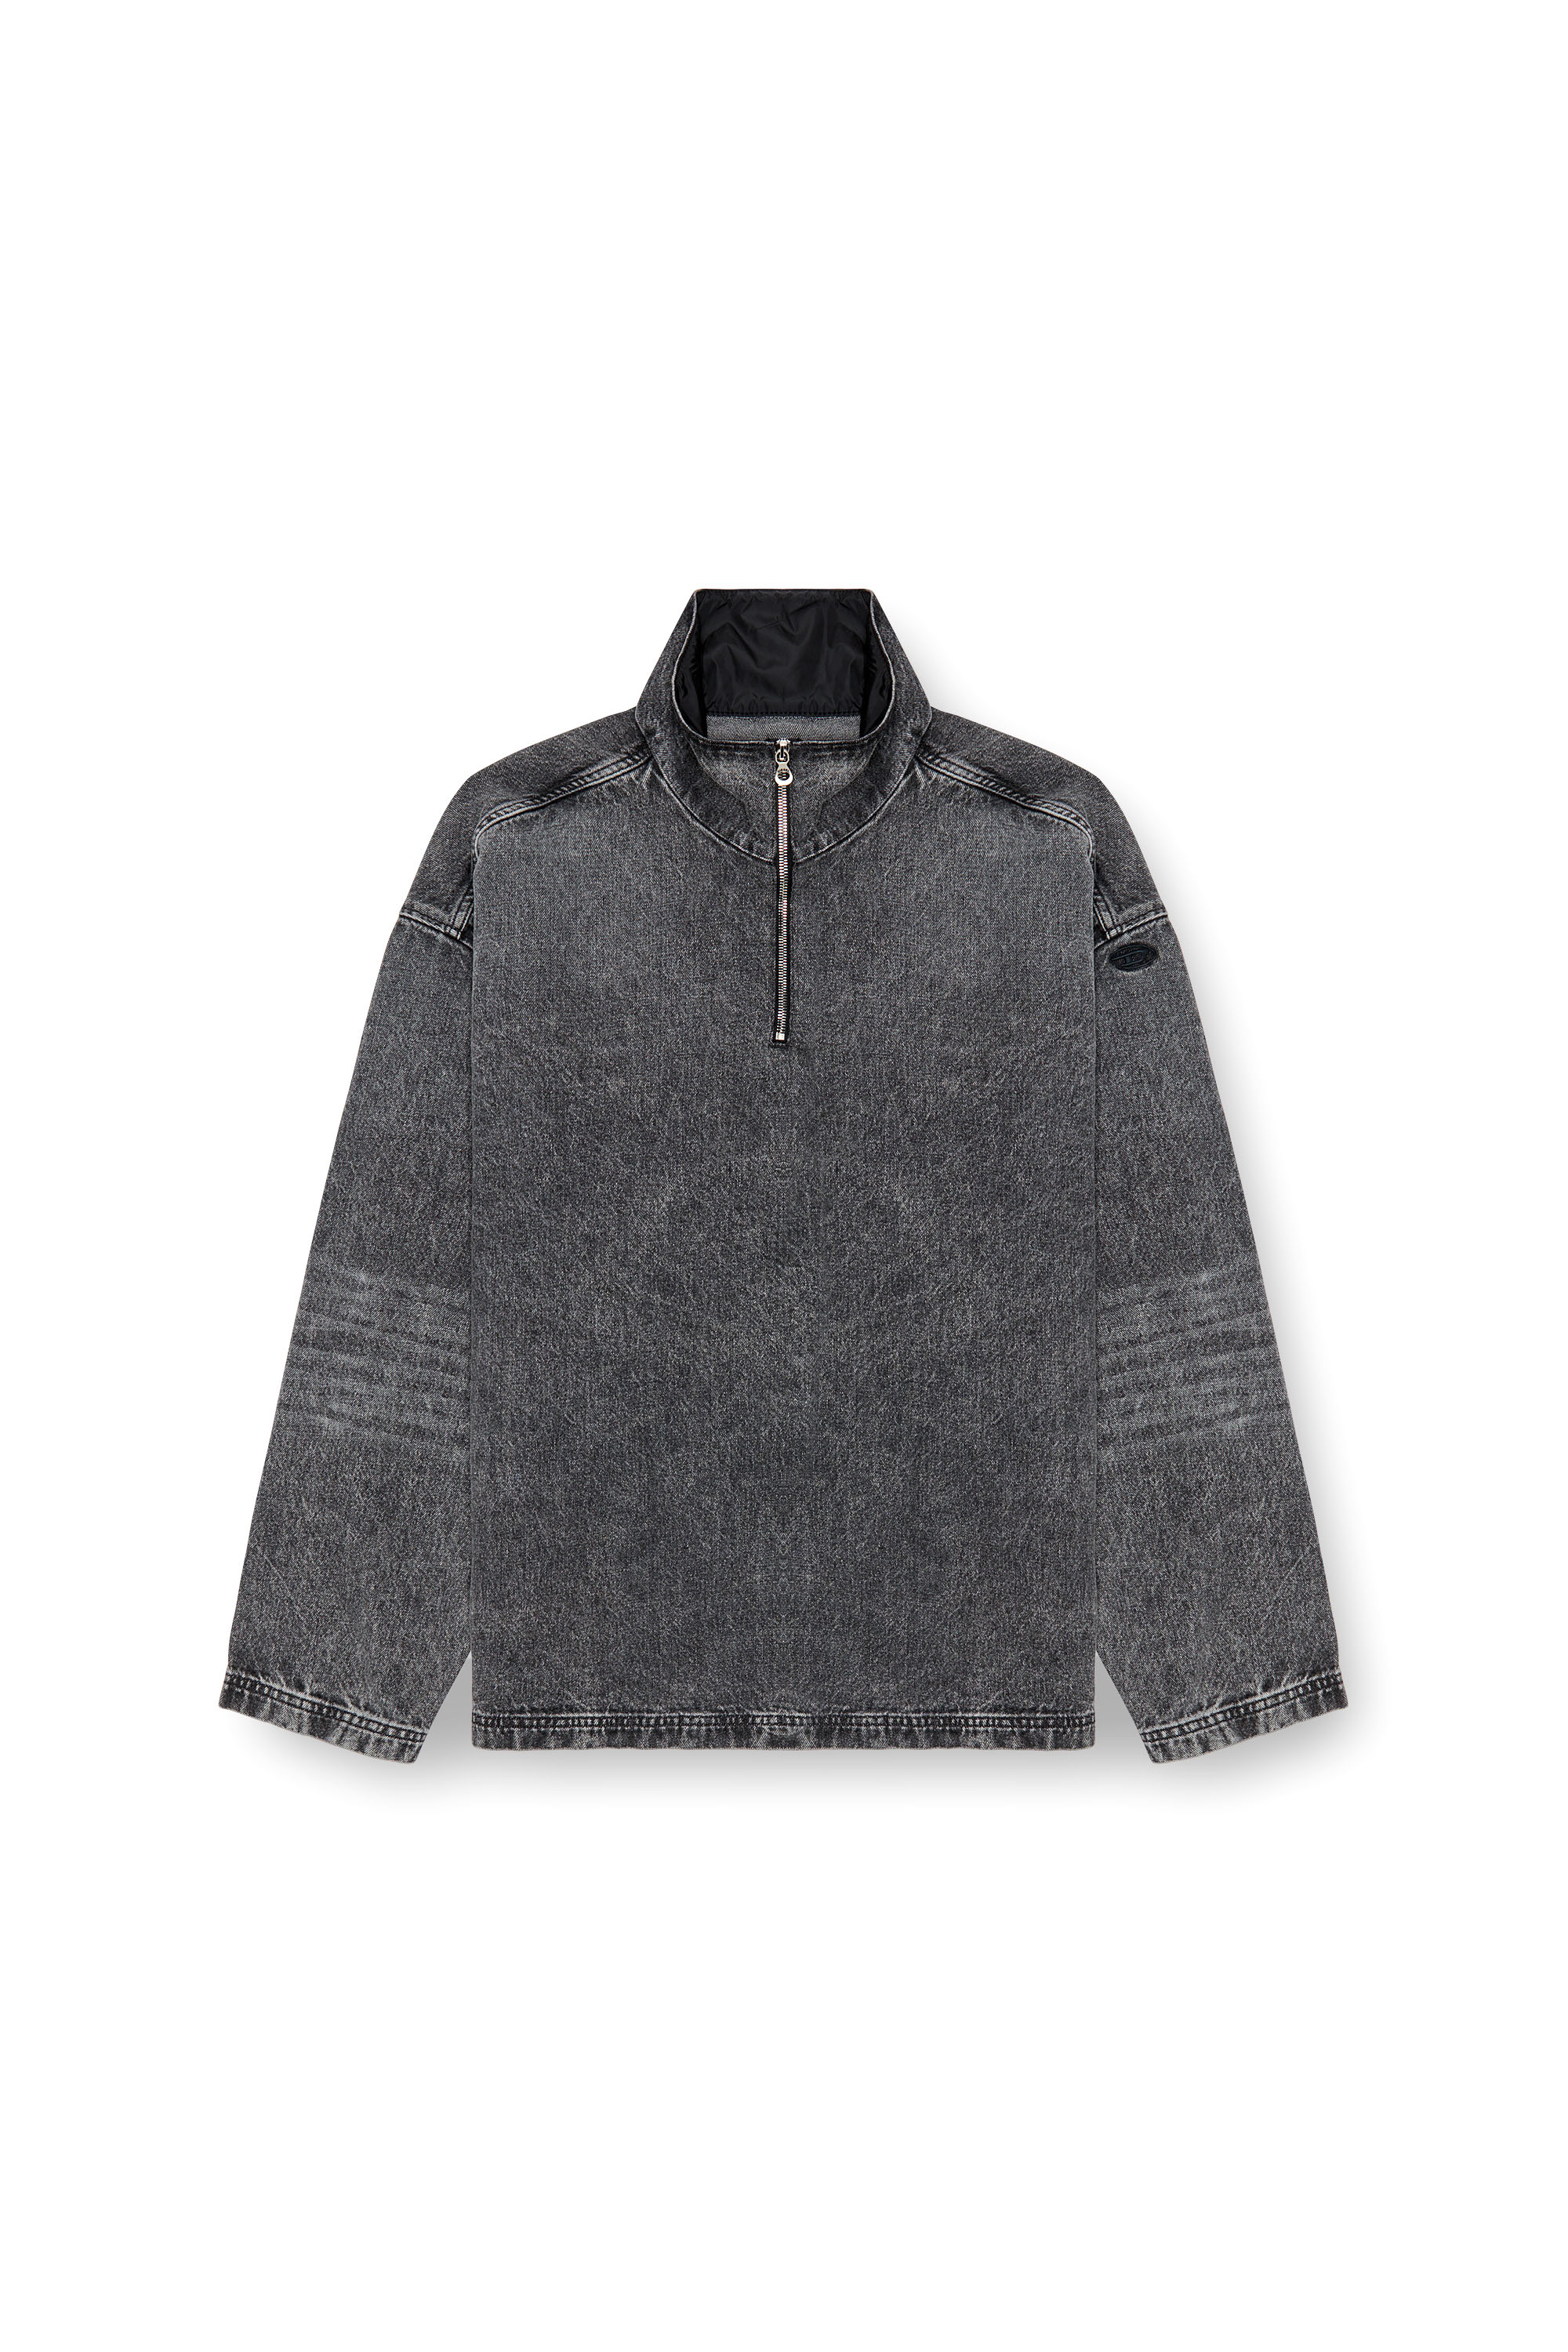 Diesel - D-FLOW-PLUS-S, Male Denim pullover with nylon inserts in ブラック - Image 3